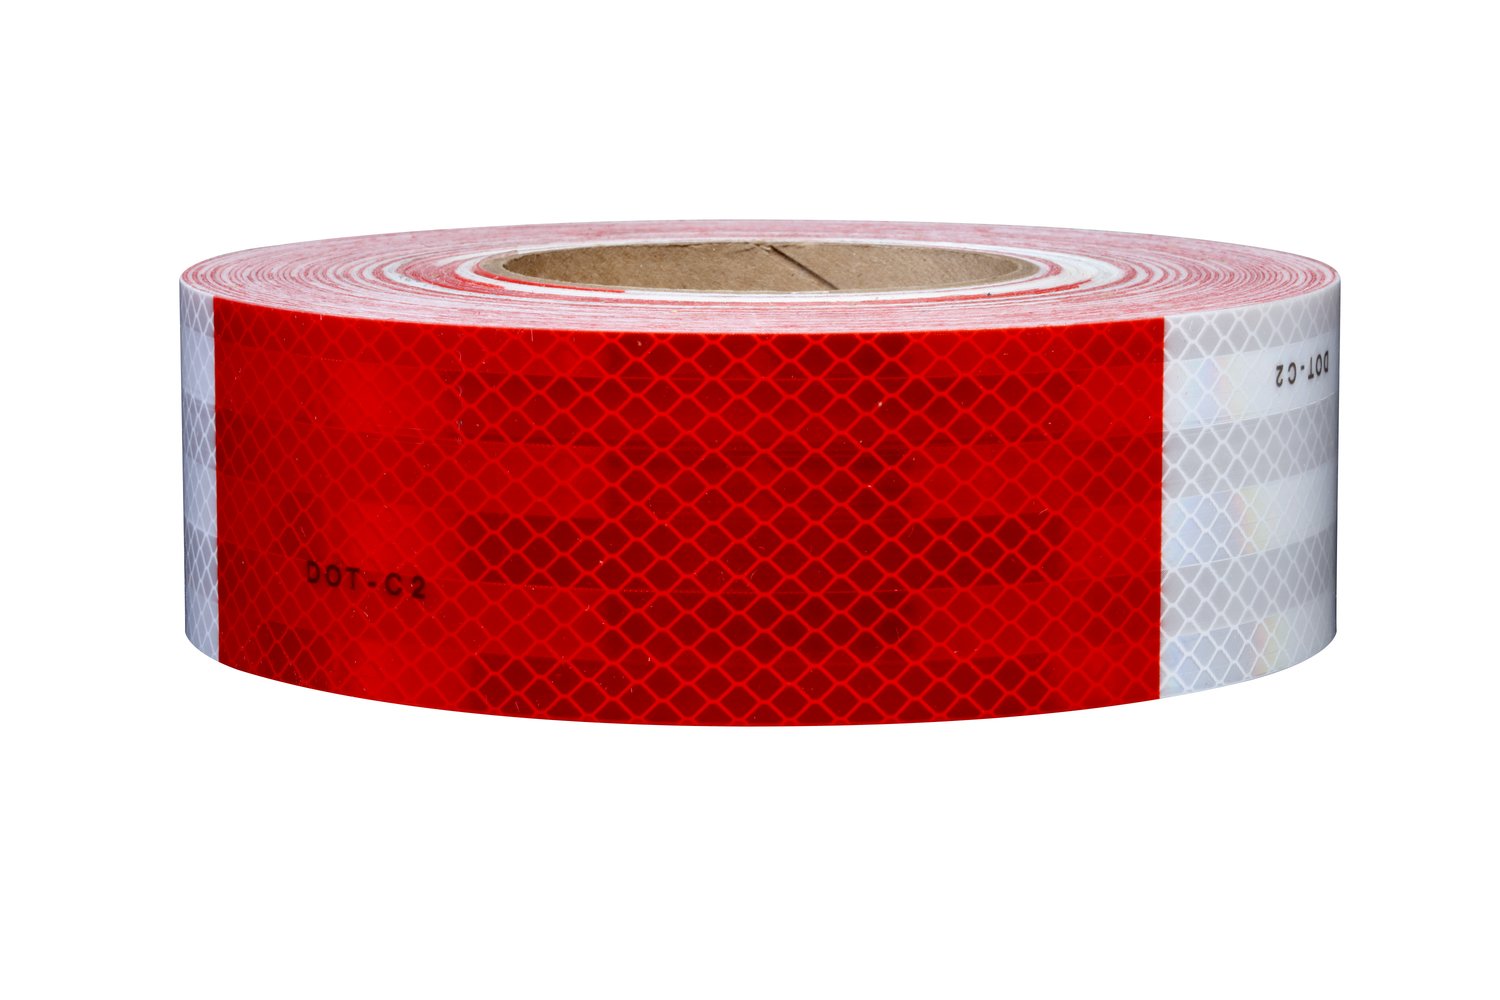 7010343760 - 3M Diamond Grade Conspicuity Markings 983-326, Red/White, DOT, 2 in x
50 yd, Kiss-cut every 24 in